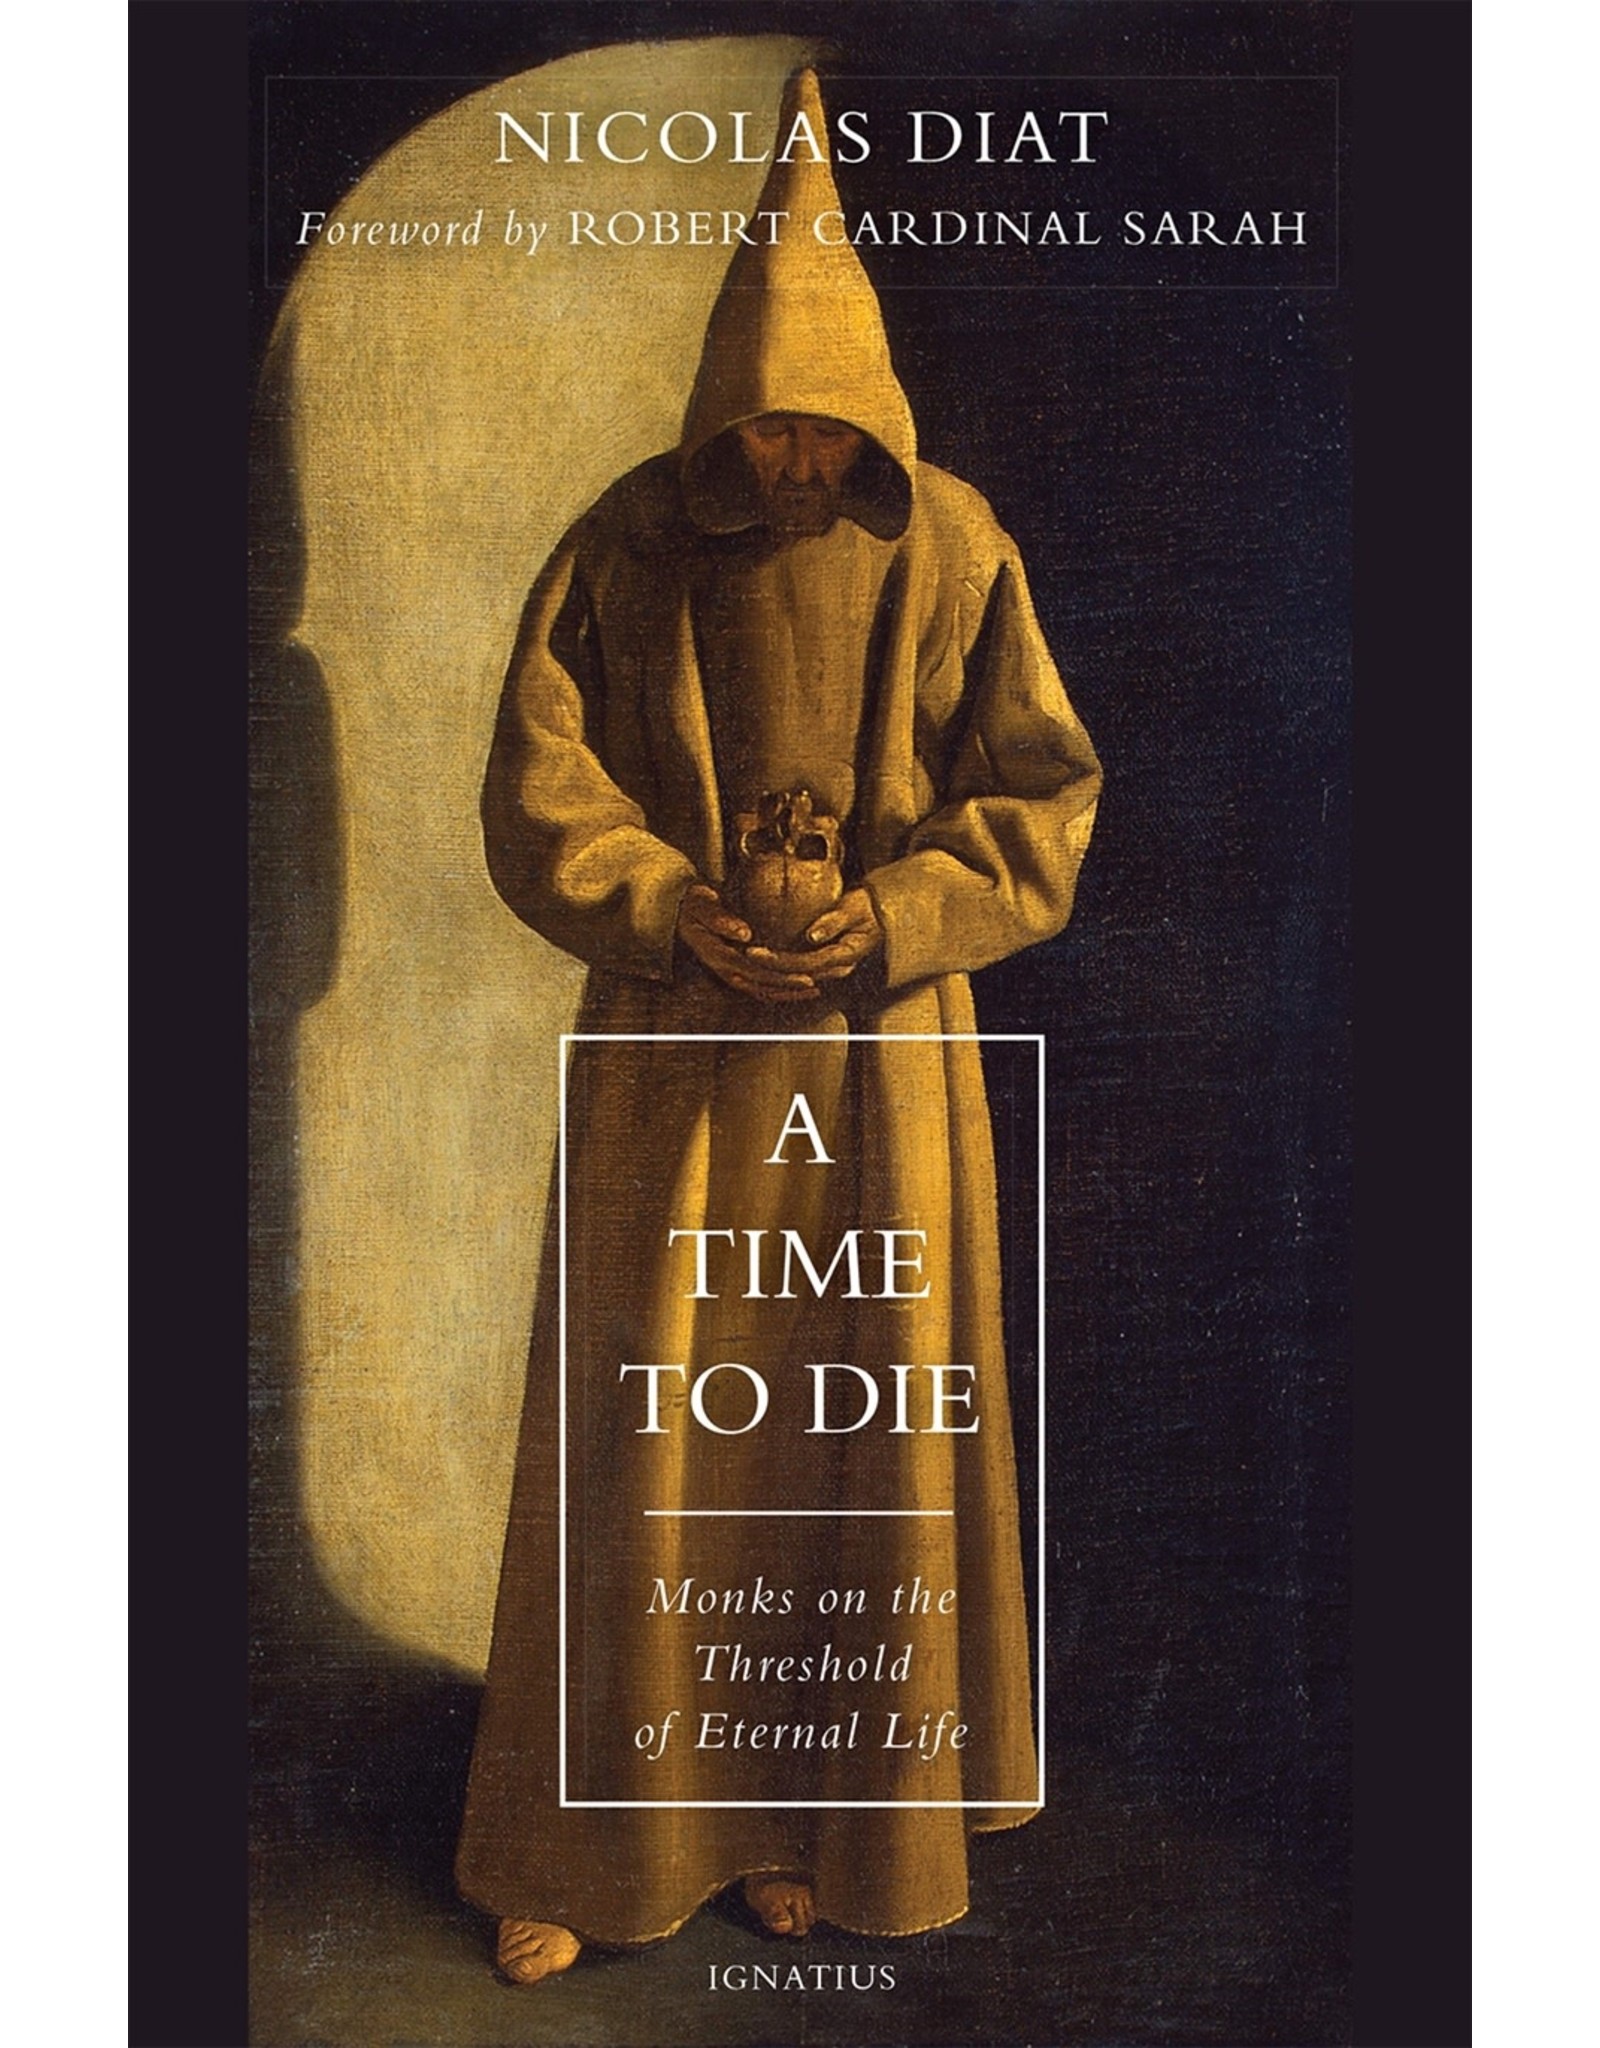 A Time to Die: Monks on the Threshold of Eternal Life